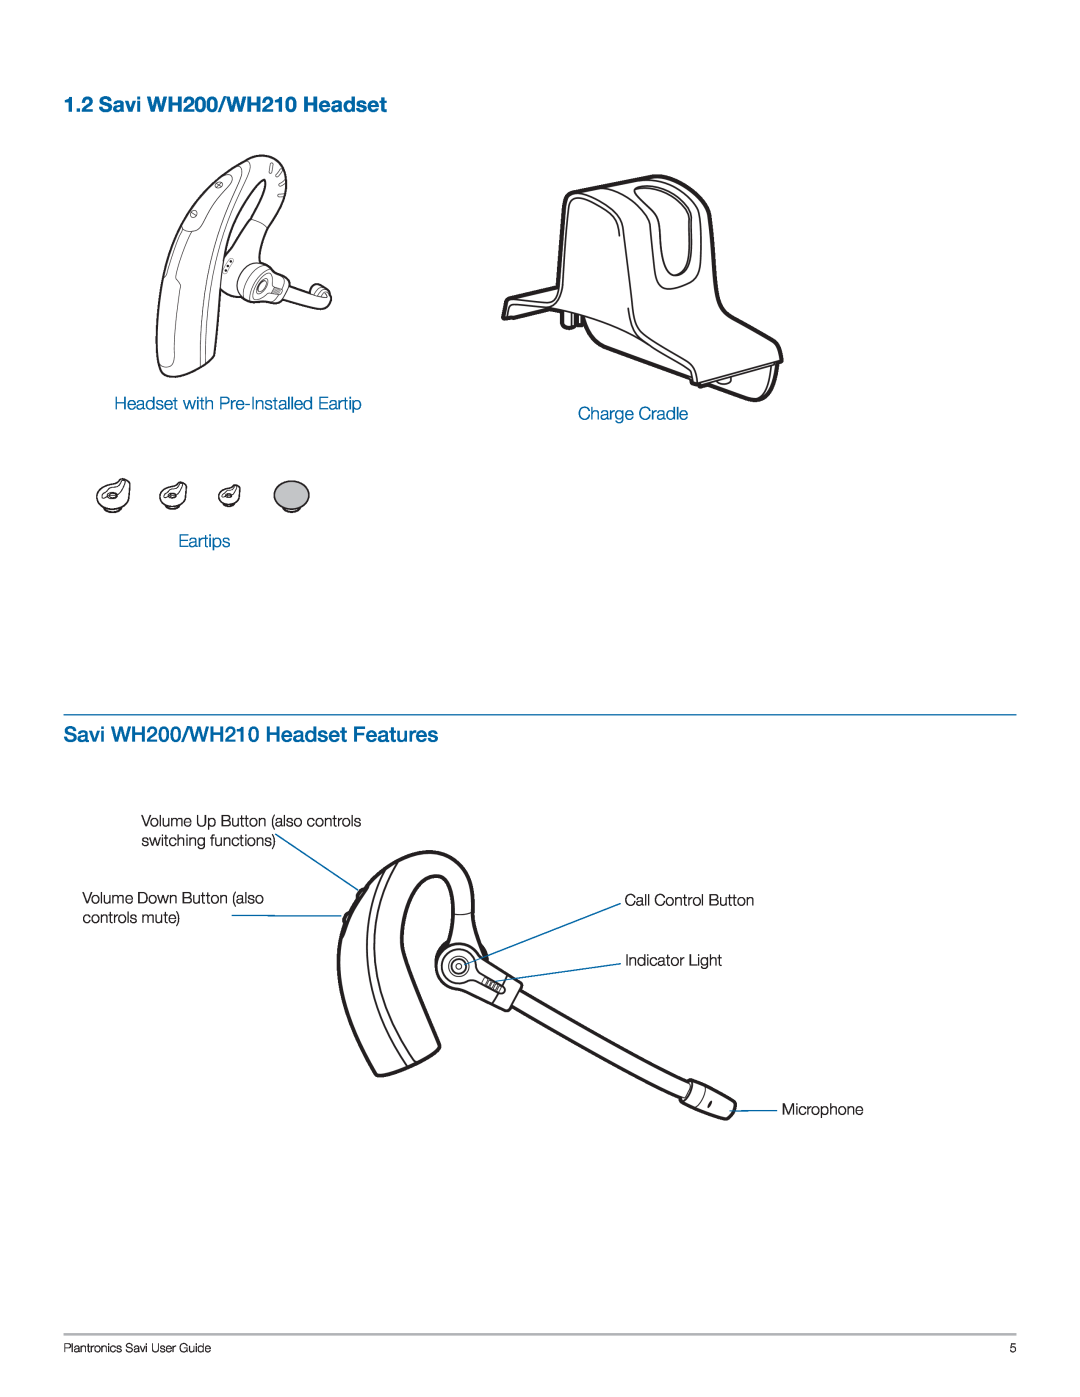 Plantronics WO200 manual Savi WH200/WH210 Headset Features, Headset with Pre-InstalledEartip, Charge Cradle, Eartips 